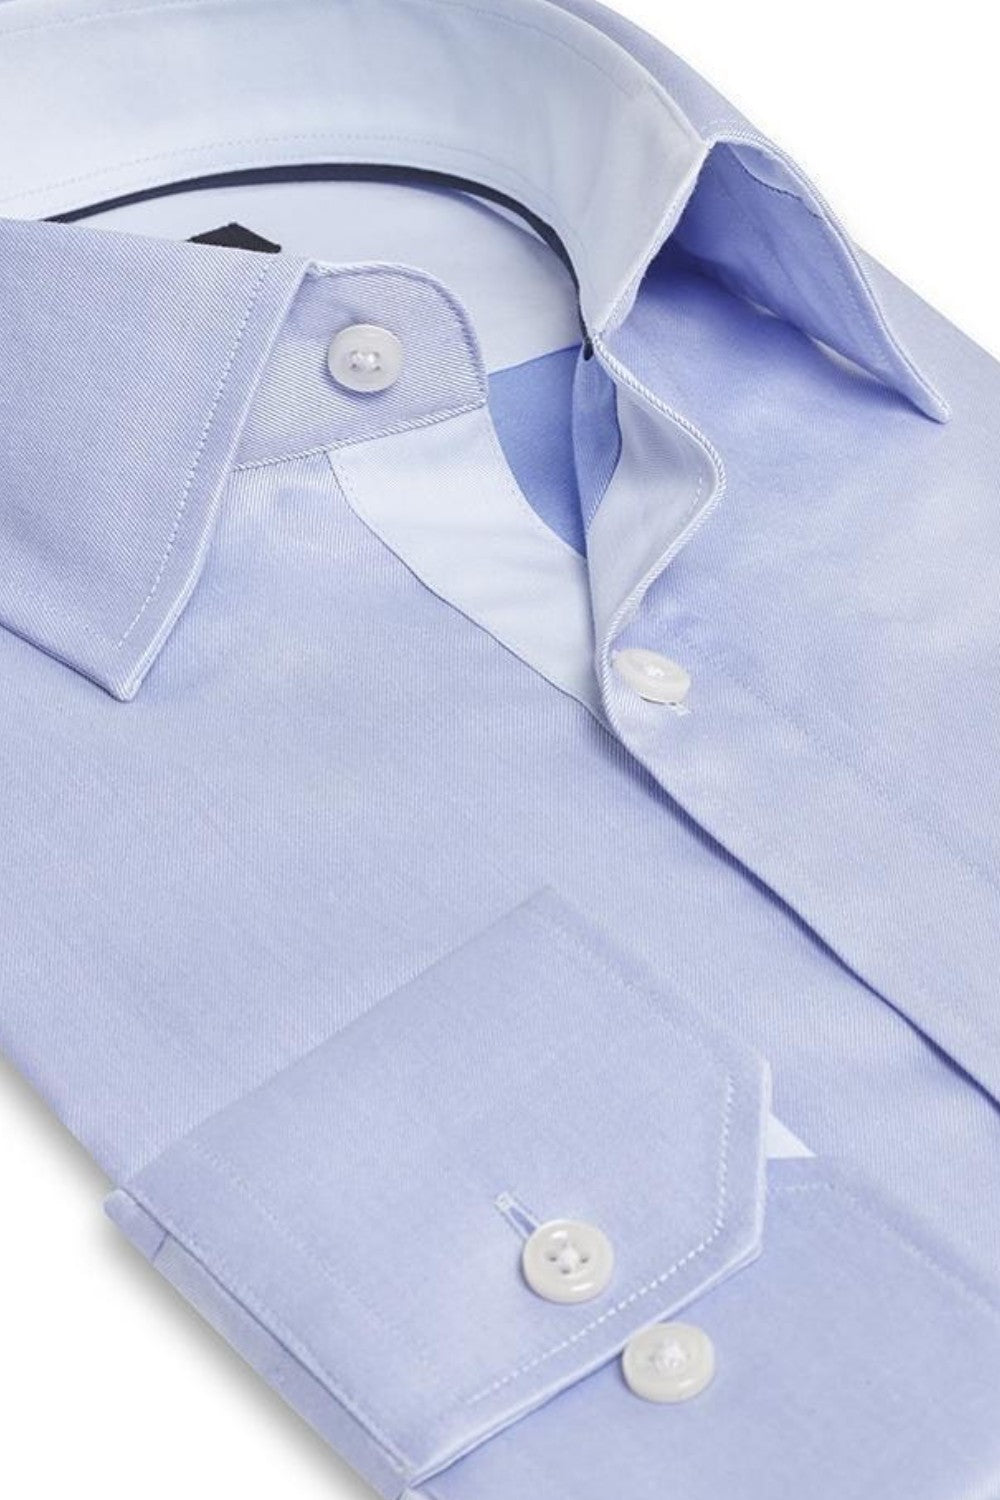 EVANS BLUE BUTTON DOWN DRESS SHIRT - CASUAL /FORMAL EVENT - SIDE VIEW